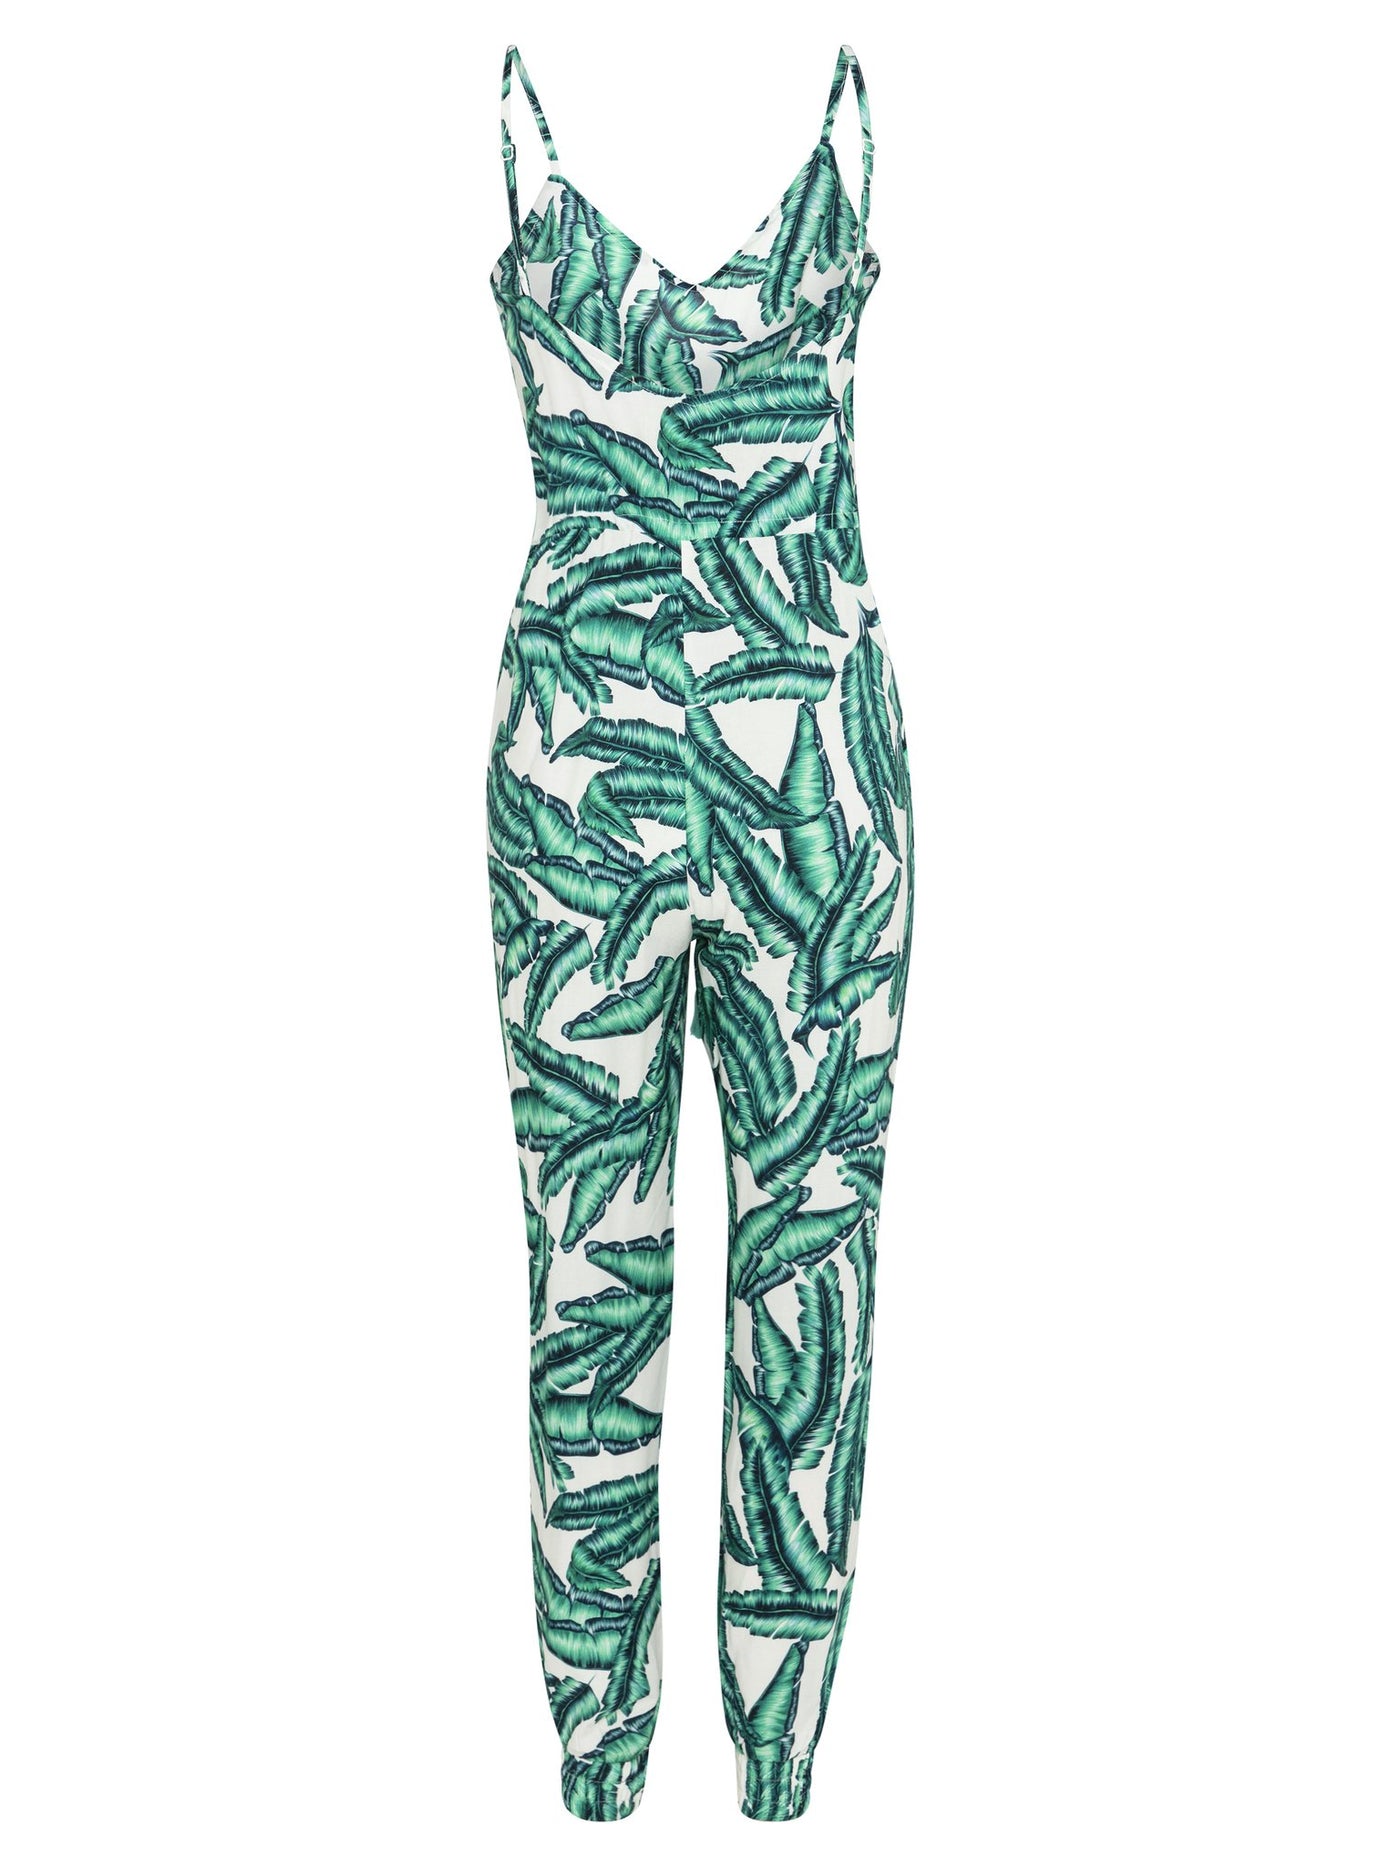 Botanical Print Casual Jumpsuit, Adjustable Straps, Side Pockets, Drawstring Tassel Tie Waist, Shirred Elastic Cuffs At Ankle, Hand Drawn Exclusive Print, 100% rayon, designed in Australia